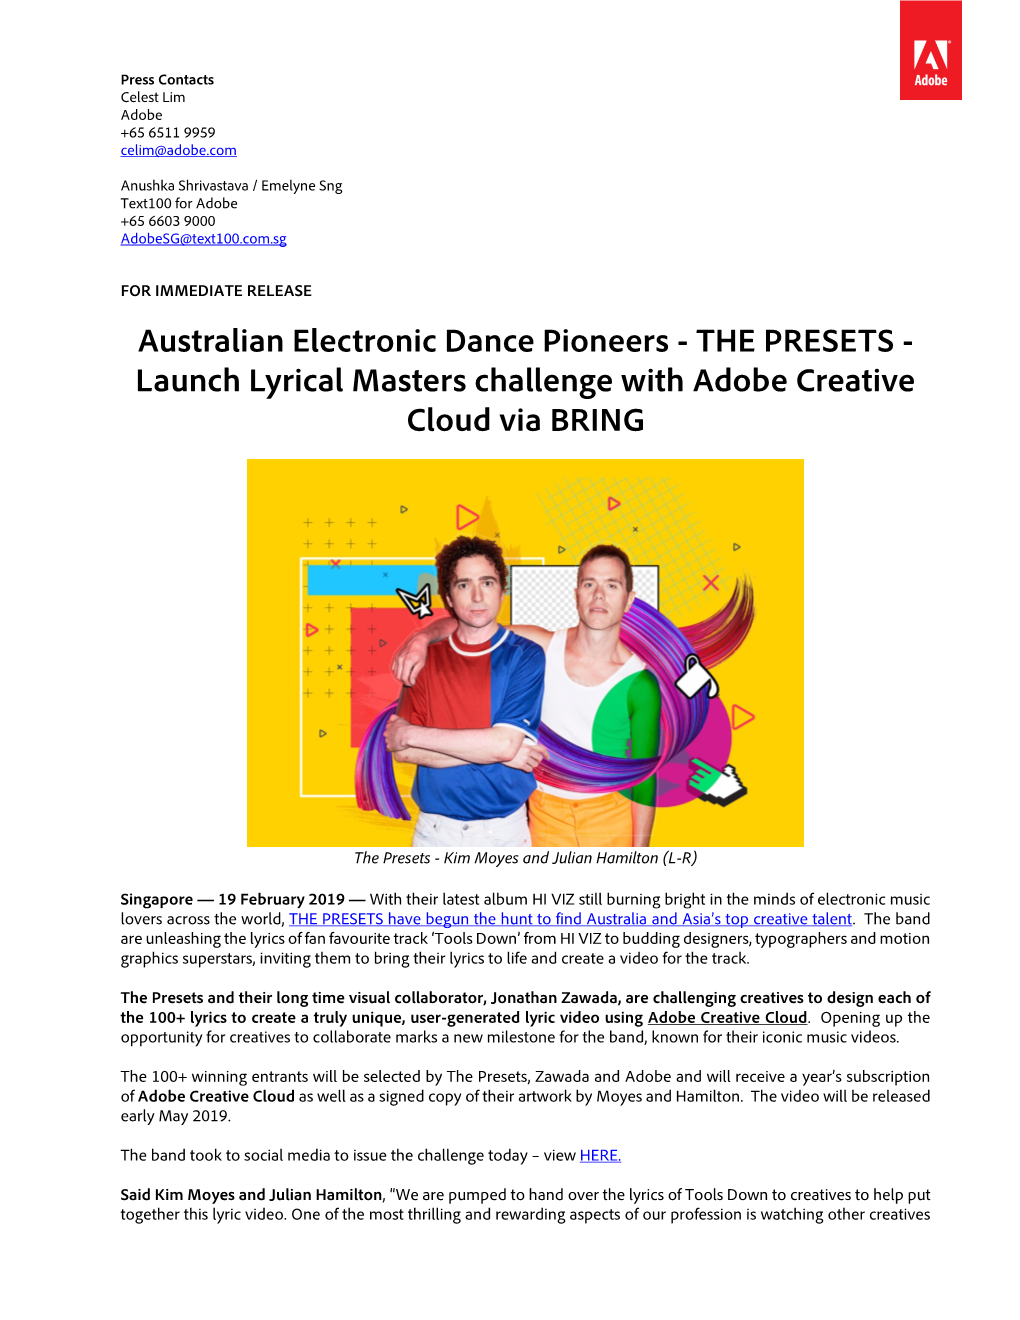 Australian Electronic Dance Pioneers - the PRESETS - Launch Lyrical Masters Challenge with Adobe Creative Cloud Via BRING